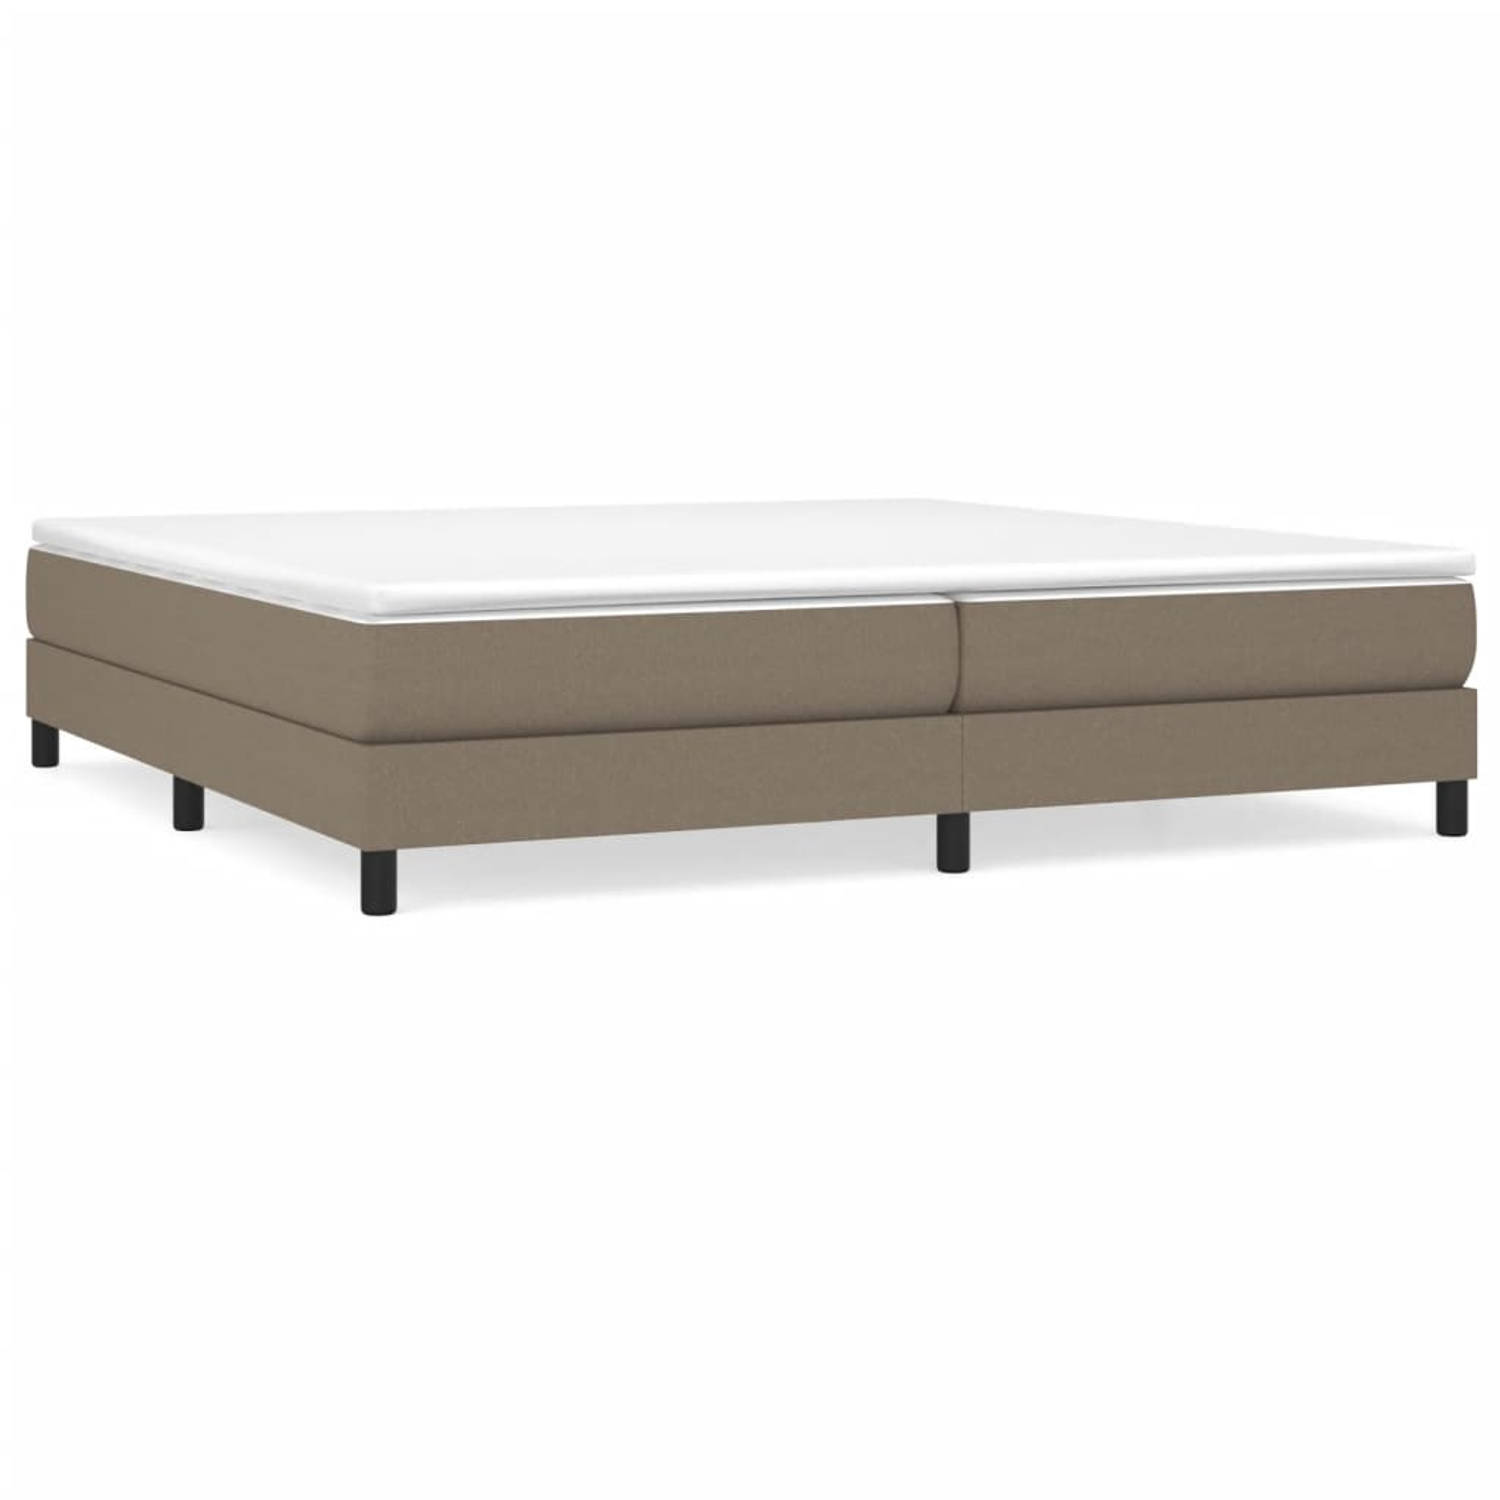 The Living Store Boxspringframe stof taupe 200x200 cm - Boxspringframe - Boxspringframes - Bed - Ledikant - Slaapmeubel - Bedframe - Bedbodem - Tweepersoonsbed - Boxspring - Bedden